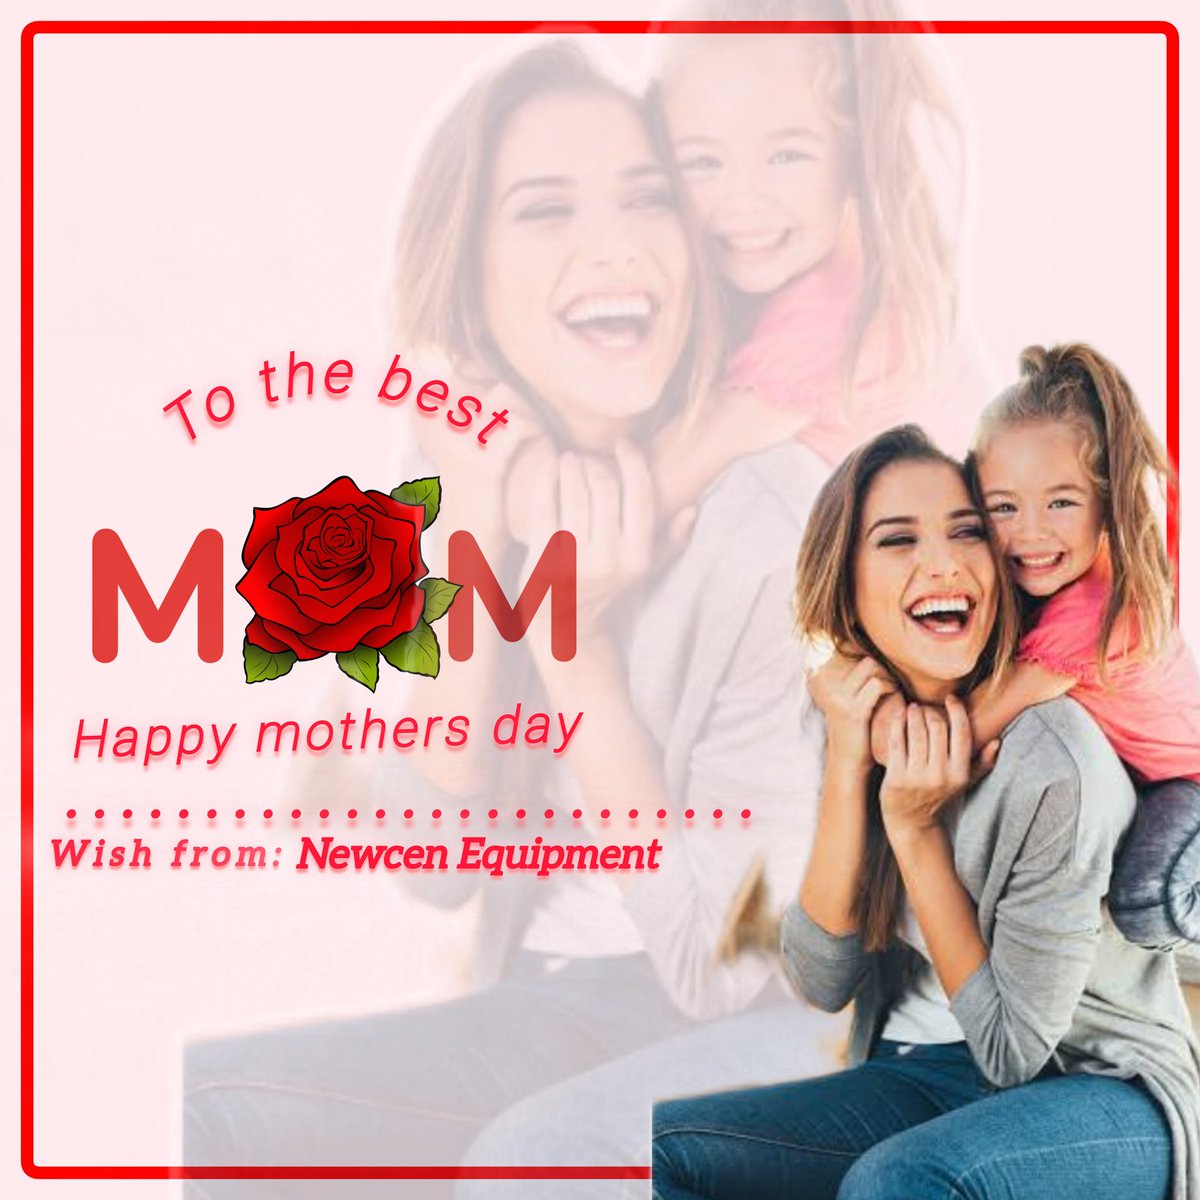 To all the wonderful mothers out there, we'd like to wish you a very happy Mother's Day. Your strength, love, and patience are an inspiration to us all. We hope you have a day filled with joy and relaxation, and that you know just how appreciated you are.